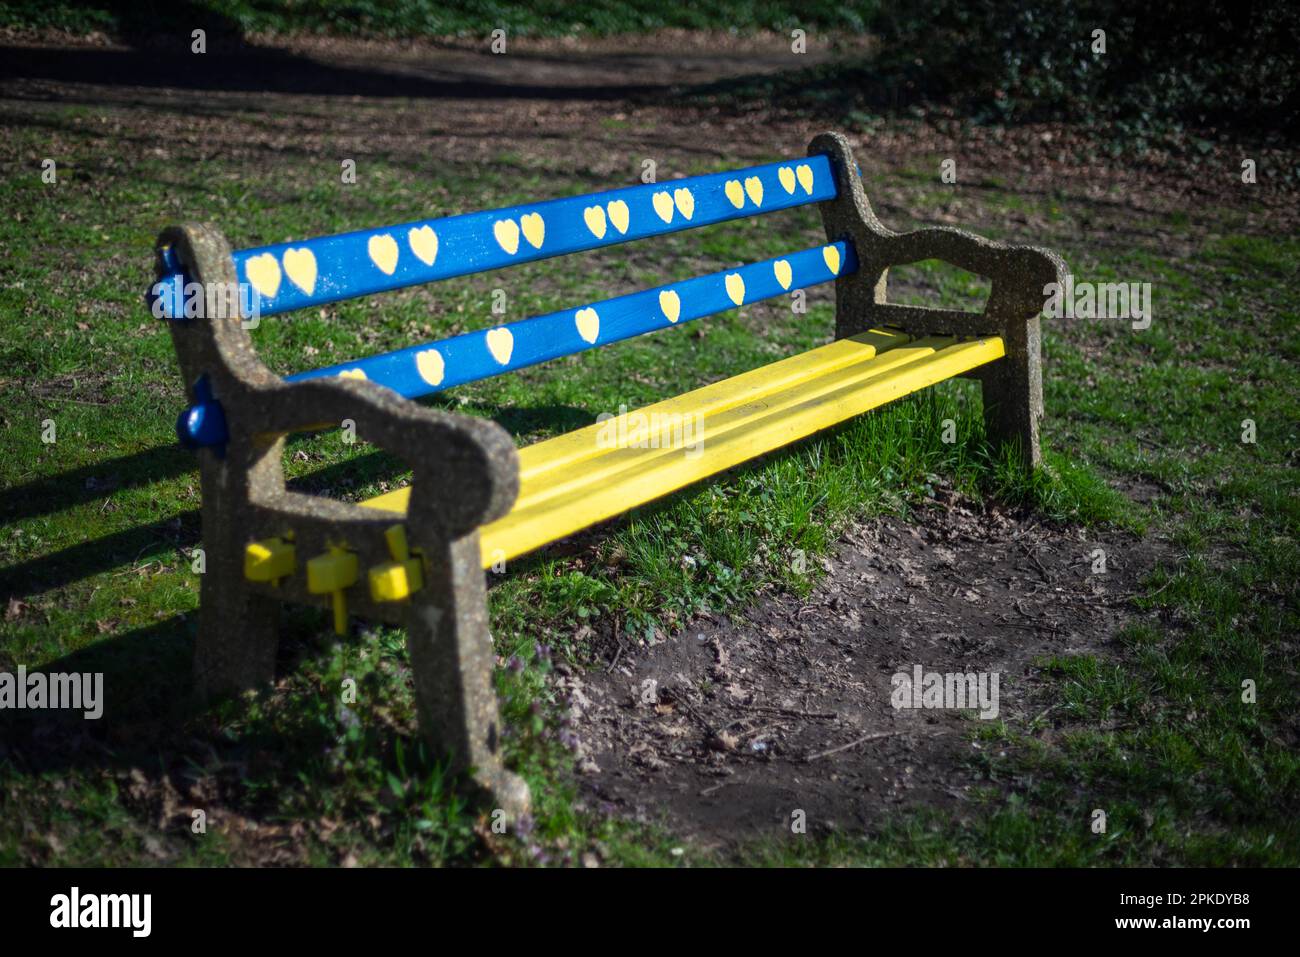 A bench painted in the national colours of Ukraine, blue and yellow - love for Ukraine concept, Southampton, England, UK Stock Photo